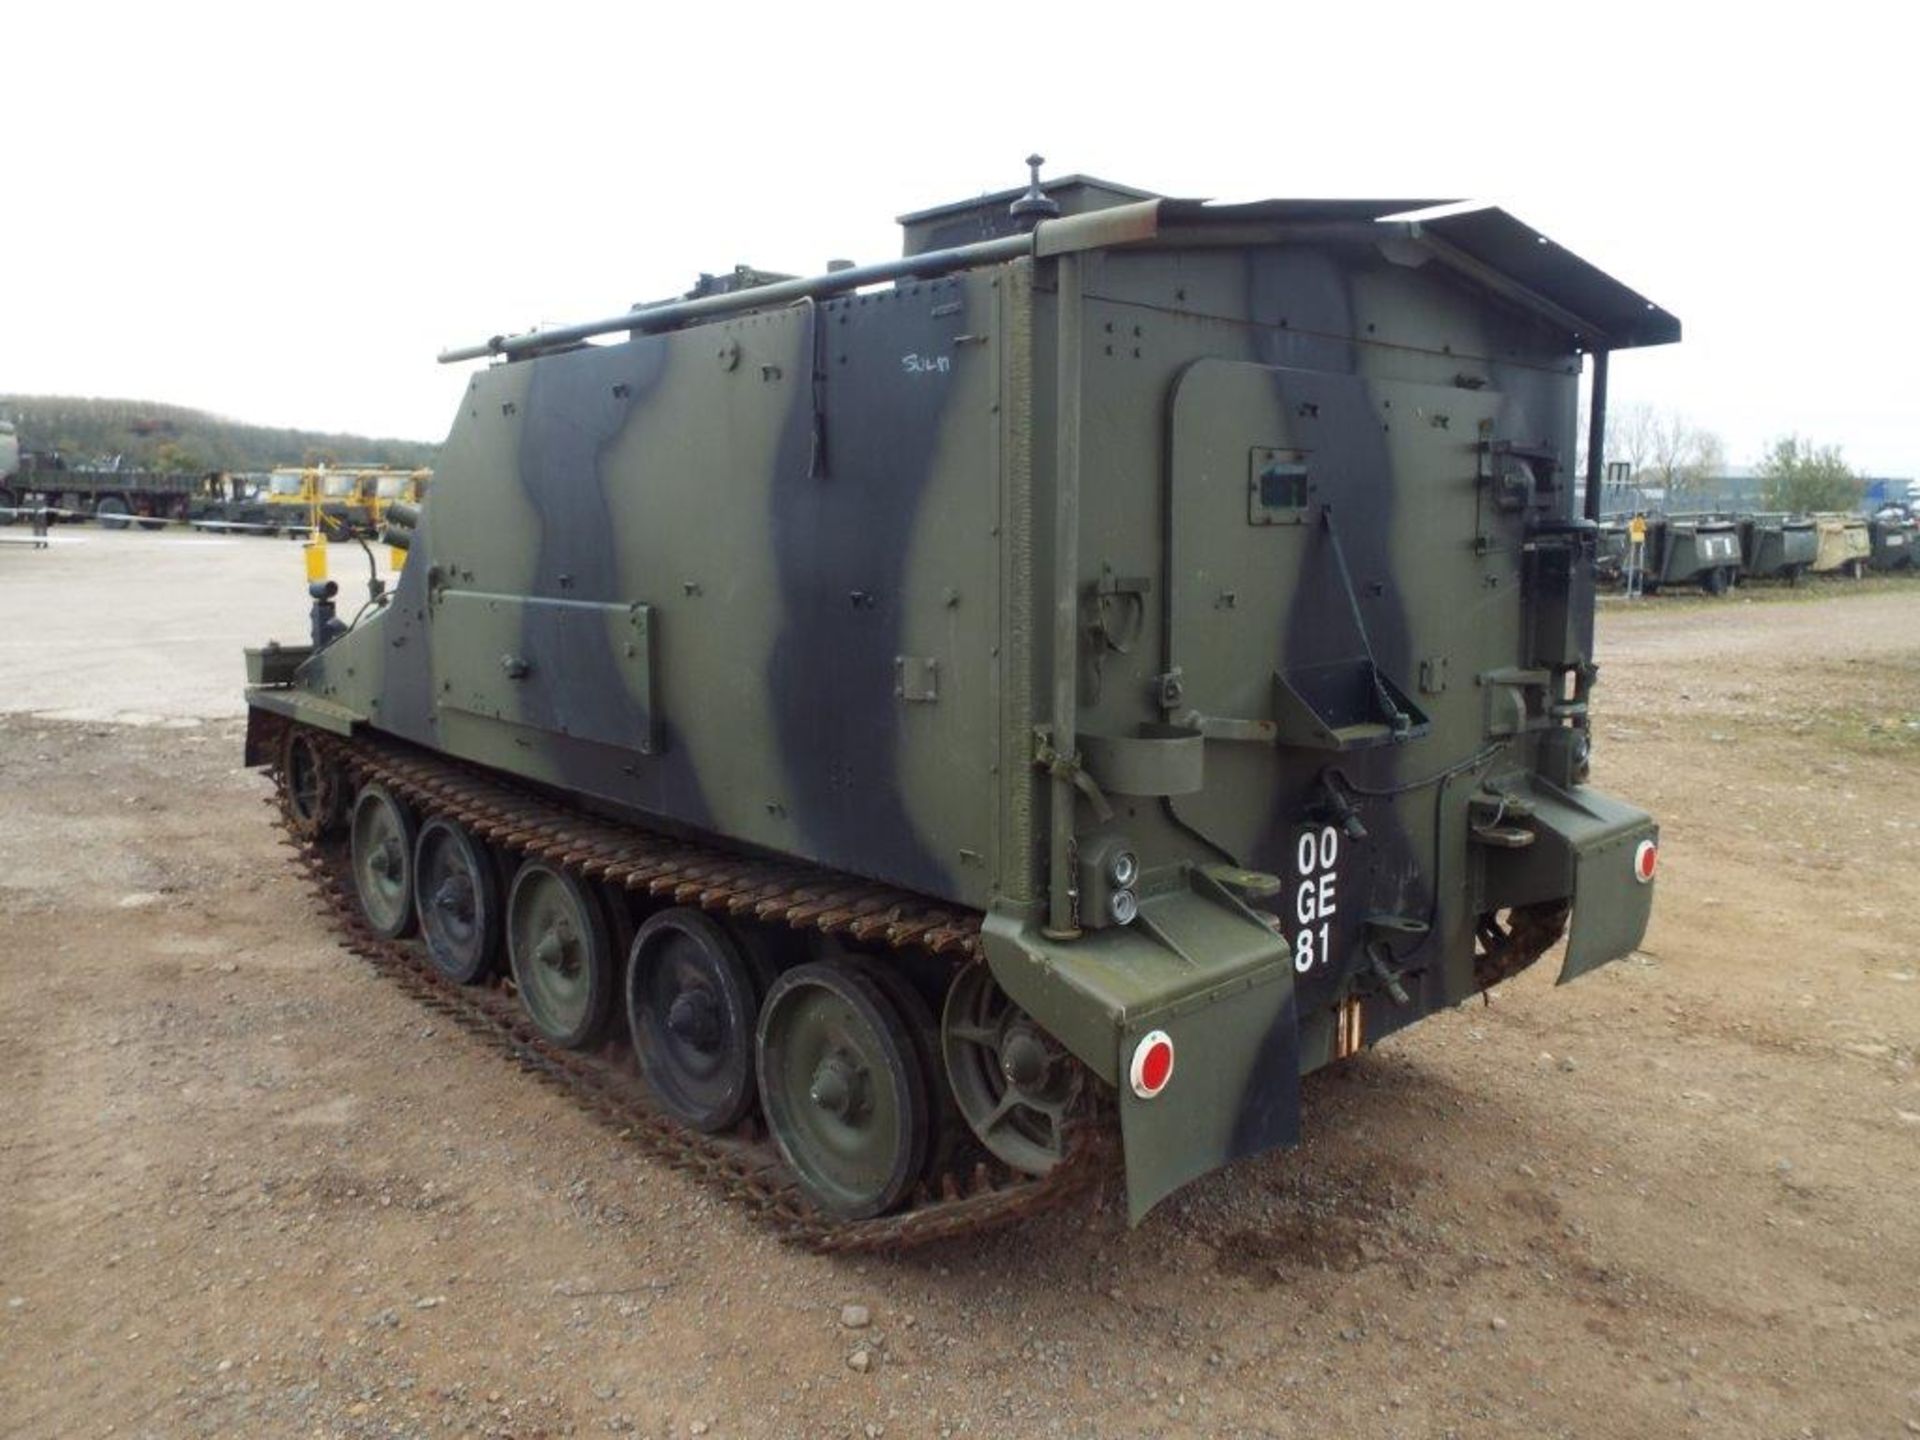 CVRT (Combat Vehicle Reconnaissance Tracked) FV105 Sultan Armoured Personnel Carrier - Image 5 of 30